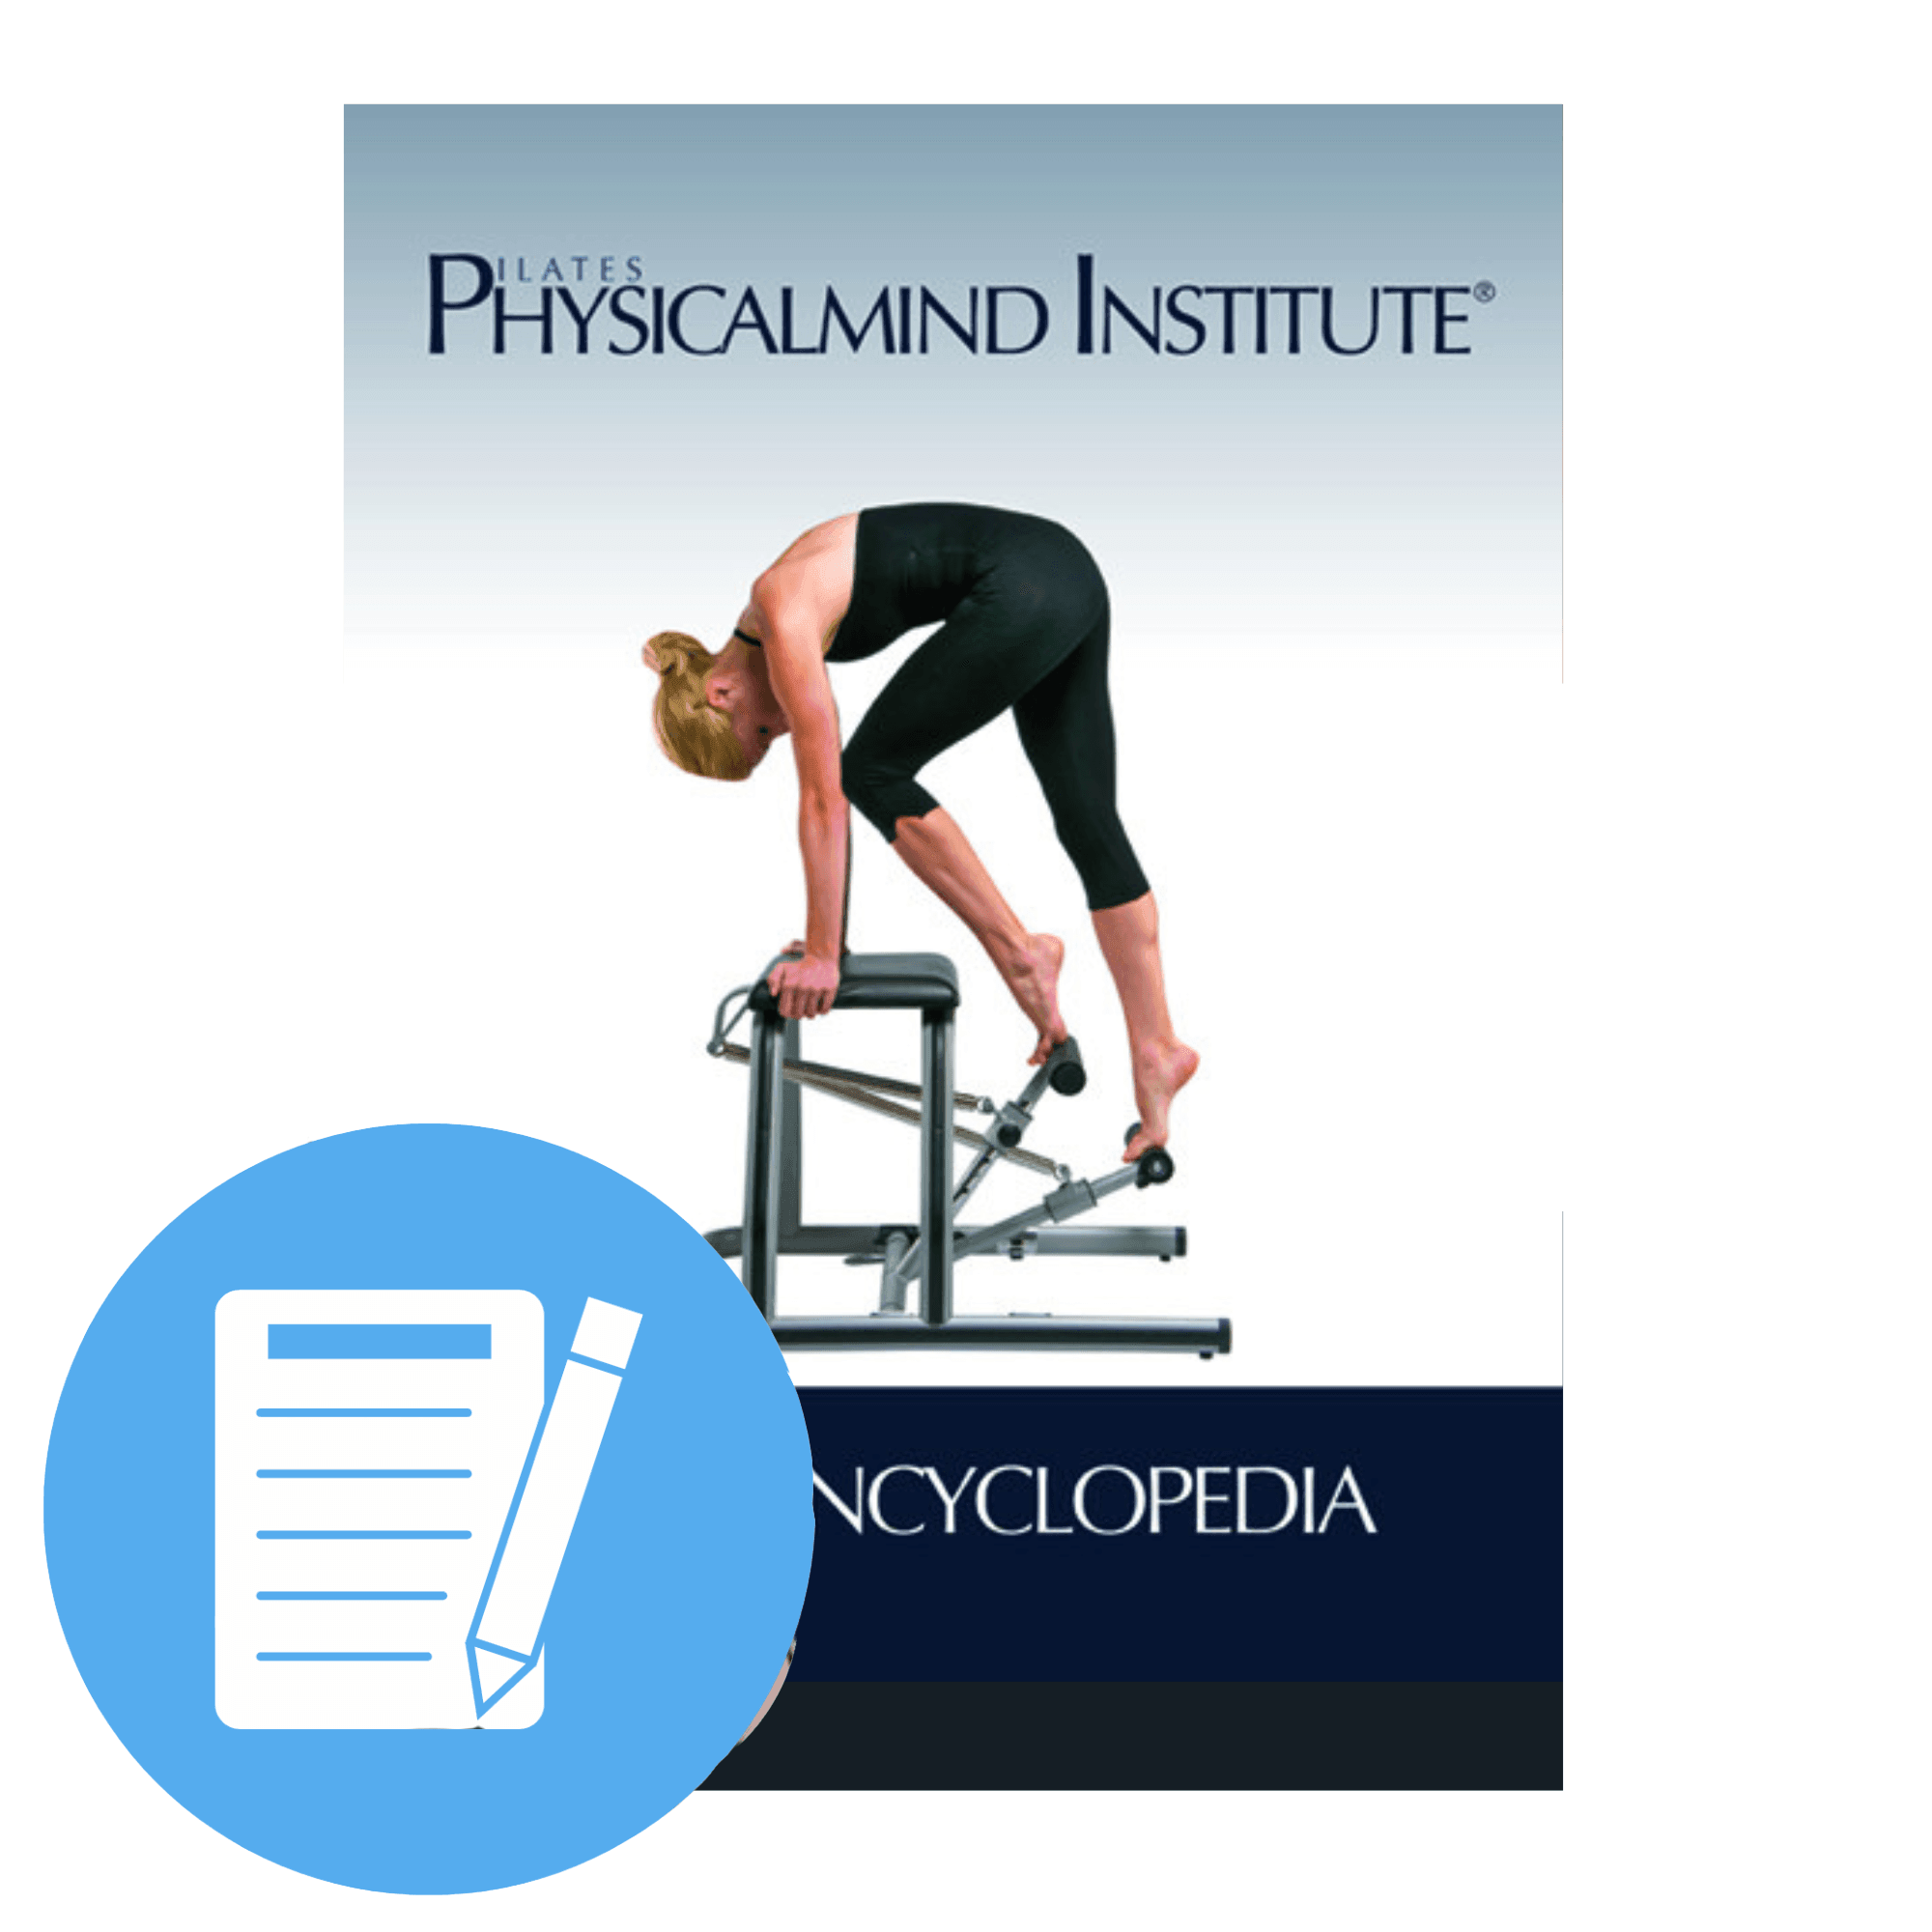 Chair Encyclopedia Exam - PhysicalMind Institute